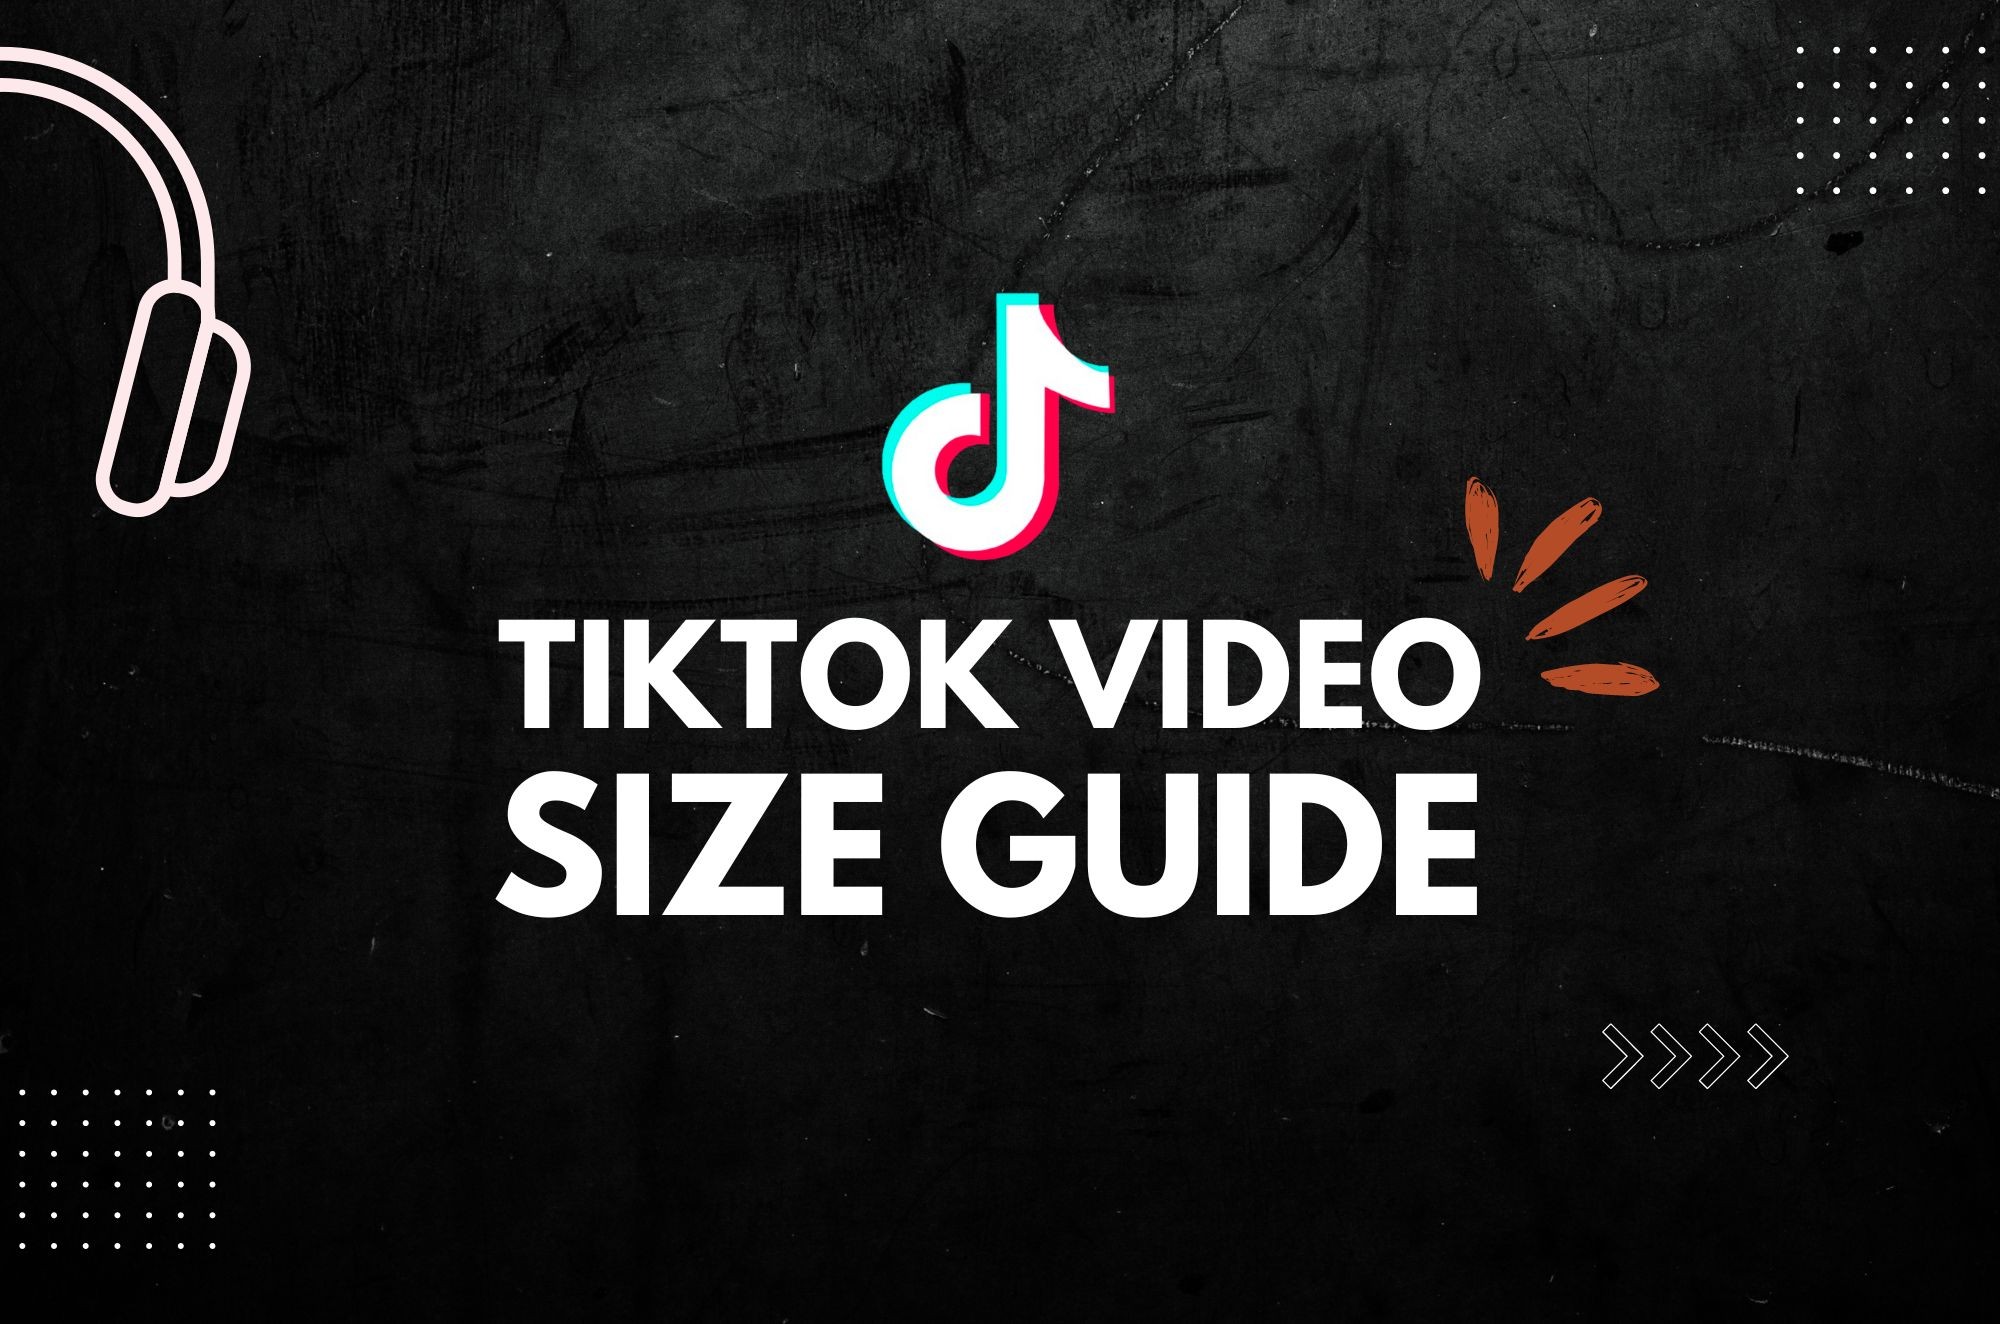 TikTok: How to fix 'This sound isn't available' error - GameRevolution